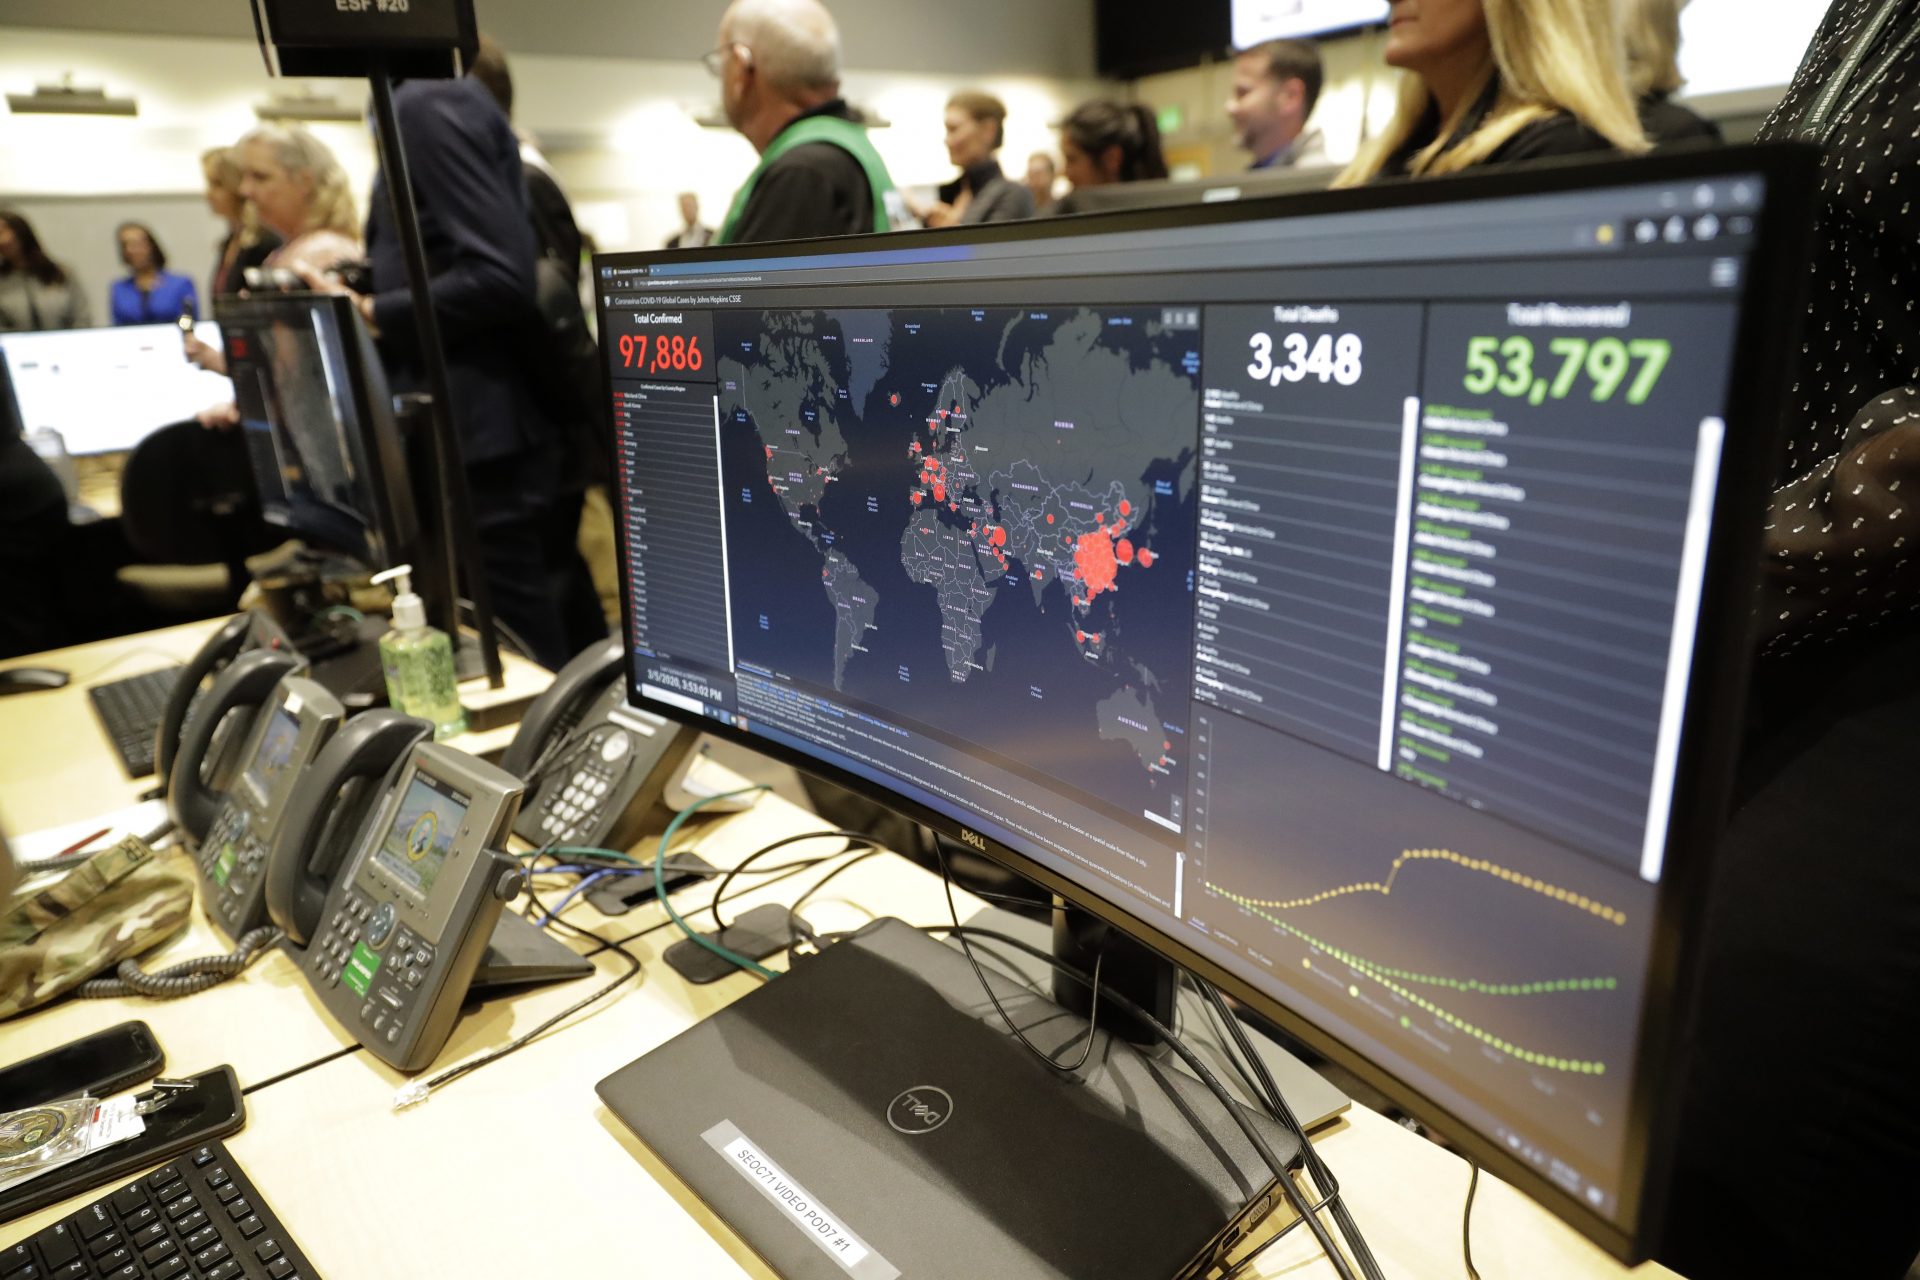 A monitor displays world-wide statistics relating to the spread of the COVID-19 coronavirus during a visit of Vice President Mike Pence to the Washington State Emergency Operations Center, Thursday, March 5, 2020 at Camp Murray in Washington state.